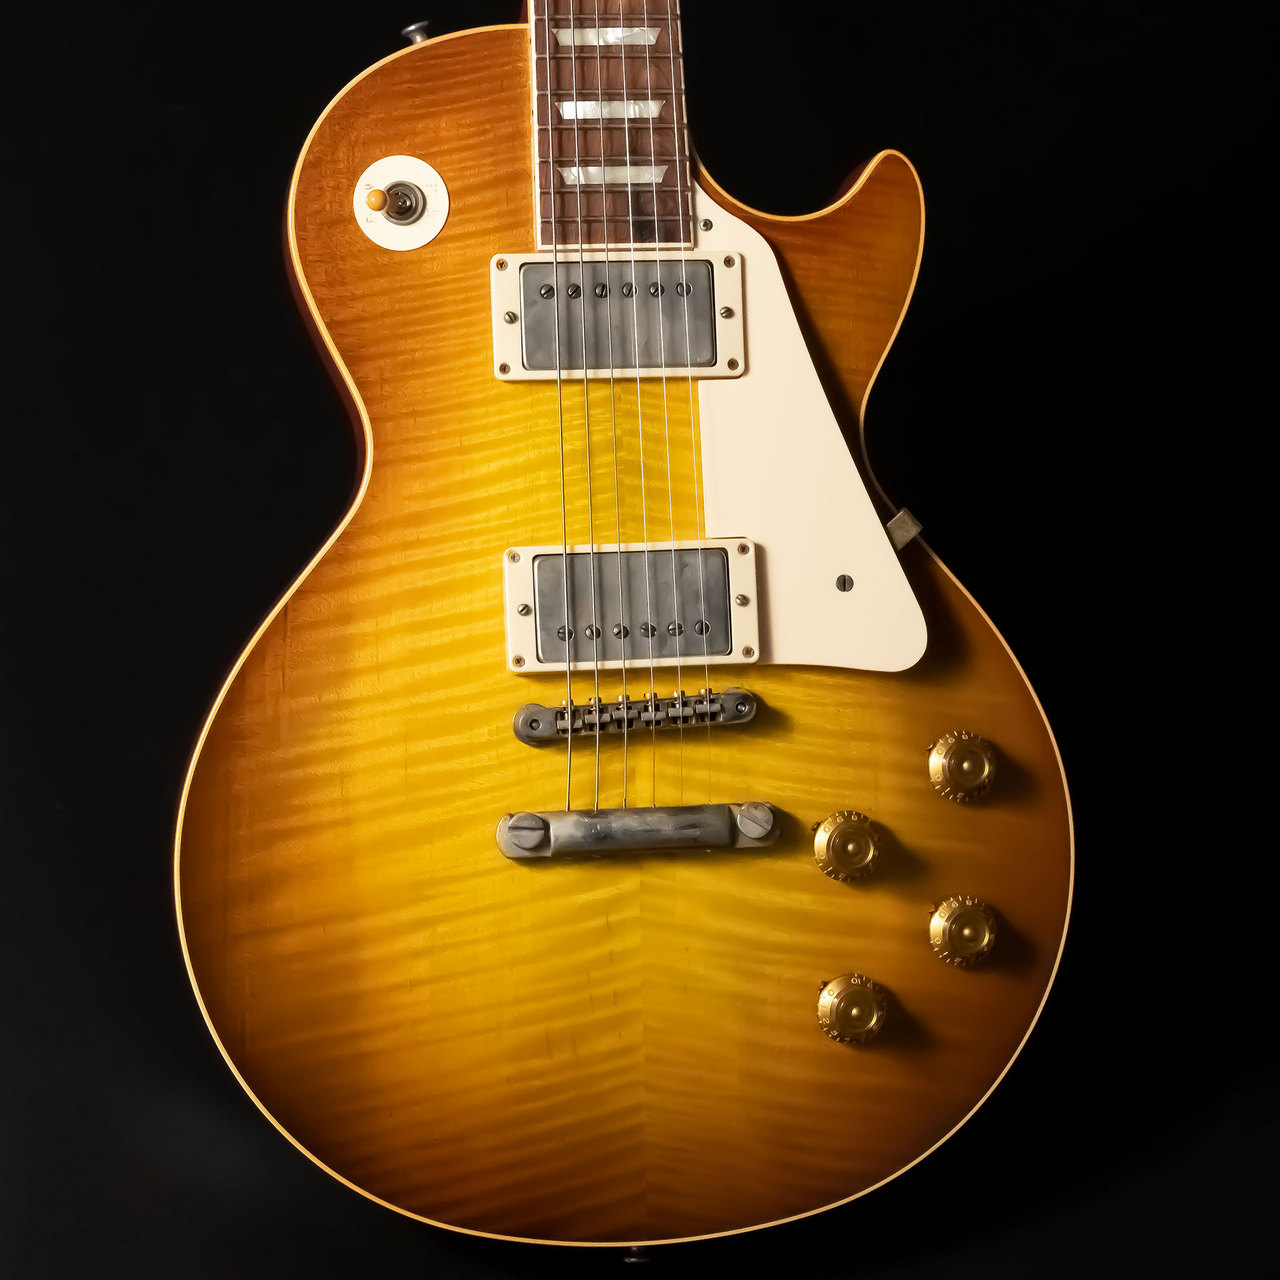 G'7 Special g7-LPS Series9 4A 59Burst